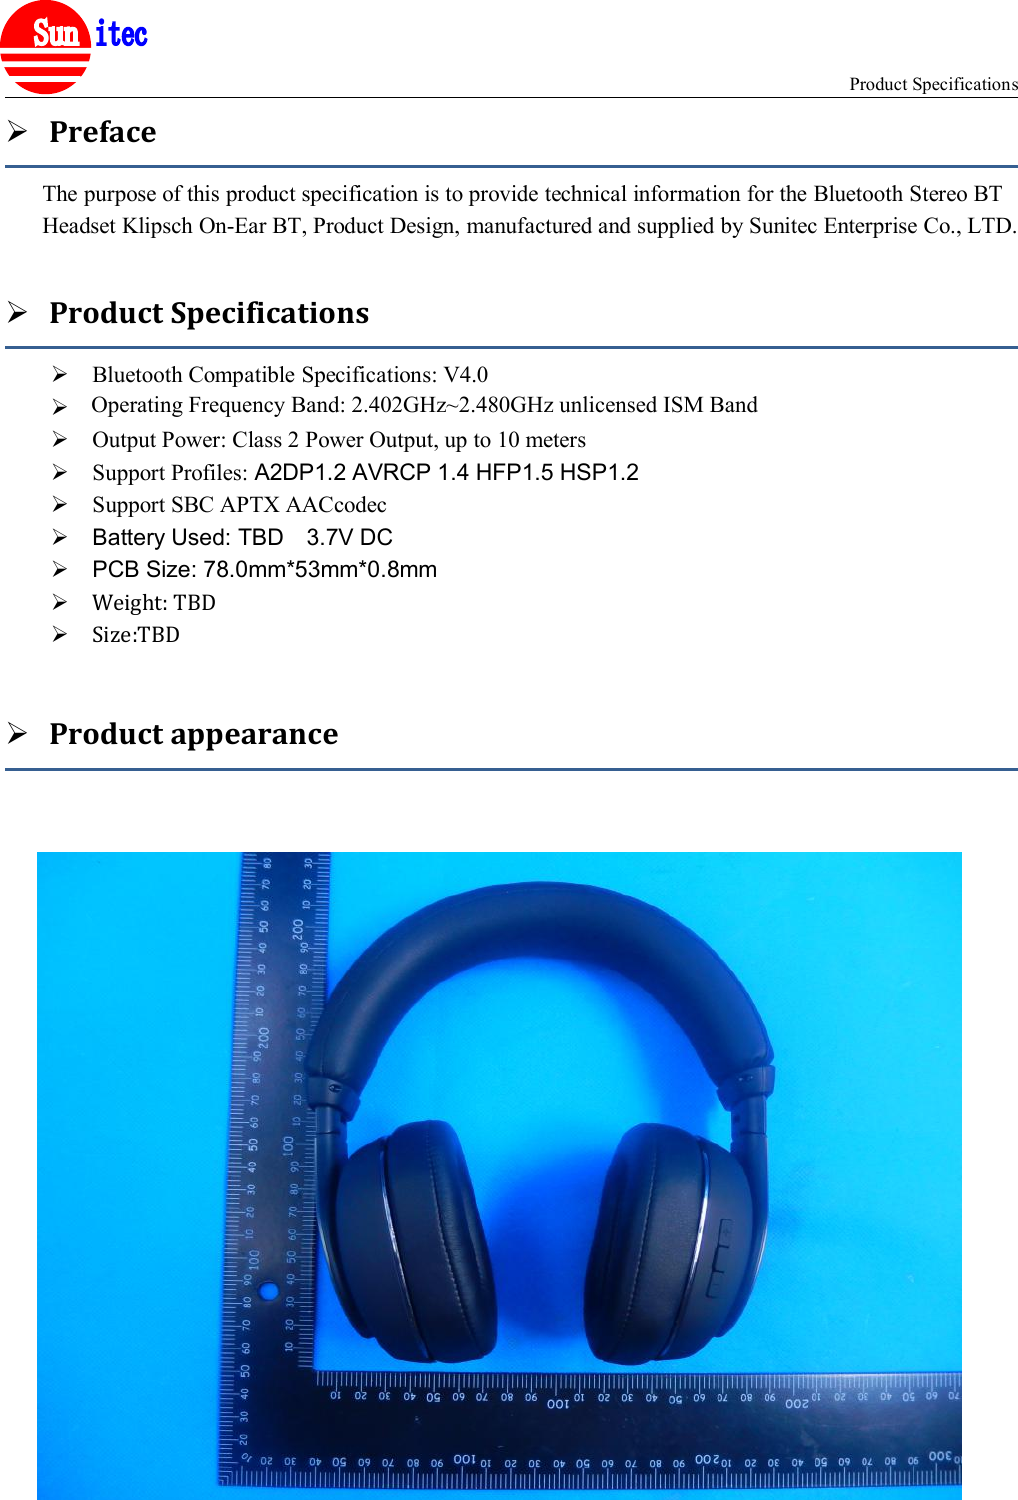 Product Specifications®PrefaceThe purpose of this product specification is to provide technical information for the Bluetooth Stereo BTHeadset Klipsch On-Ear BT, Product Design, manufactured and supplied by Sunitec Enterprise Co., LTD.Product SpecificationsBluetooth Compatible Specifications: V4.0Operating Frequency Band: 2.4GHz~2.48GHz unlicensed ISM BandOutput Power: Class 2 Power Output, up to 10 metersSupport Profiles: A2DP1.2 AVRCP 1.4 HFP1.5 HSP1.2Support SBC APTX AACcodecBattery Used: TBD 3.7V DCPCB Size: 78.0mm*53mm*0.8mmWeight: TBDSize:TBDProduct appearanceOperating Frequency Band: 2.402GHz~2.480GHz unlicensed ISM Band